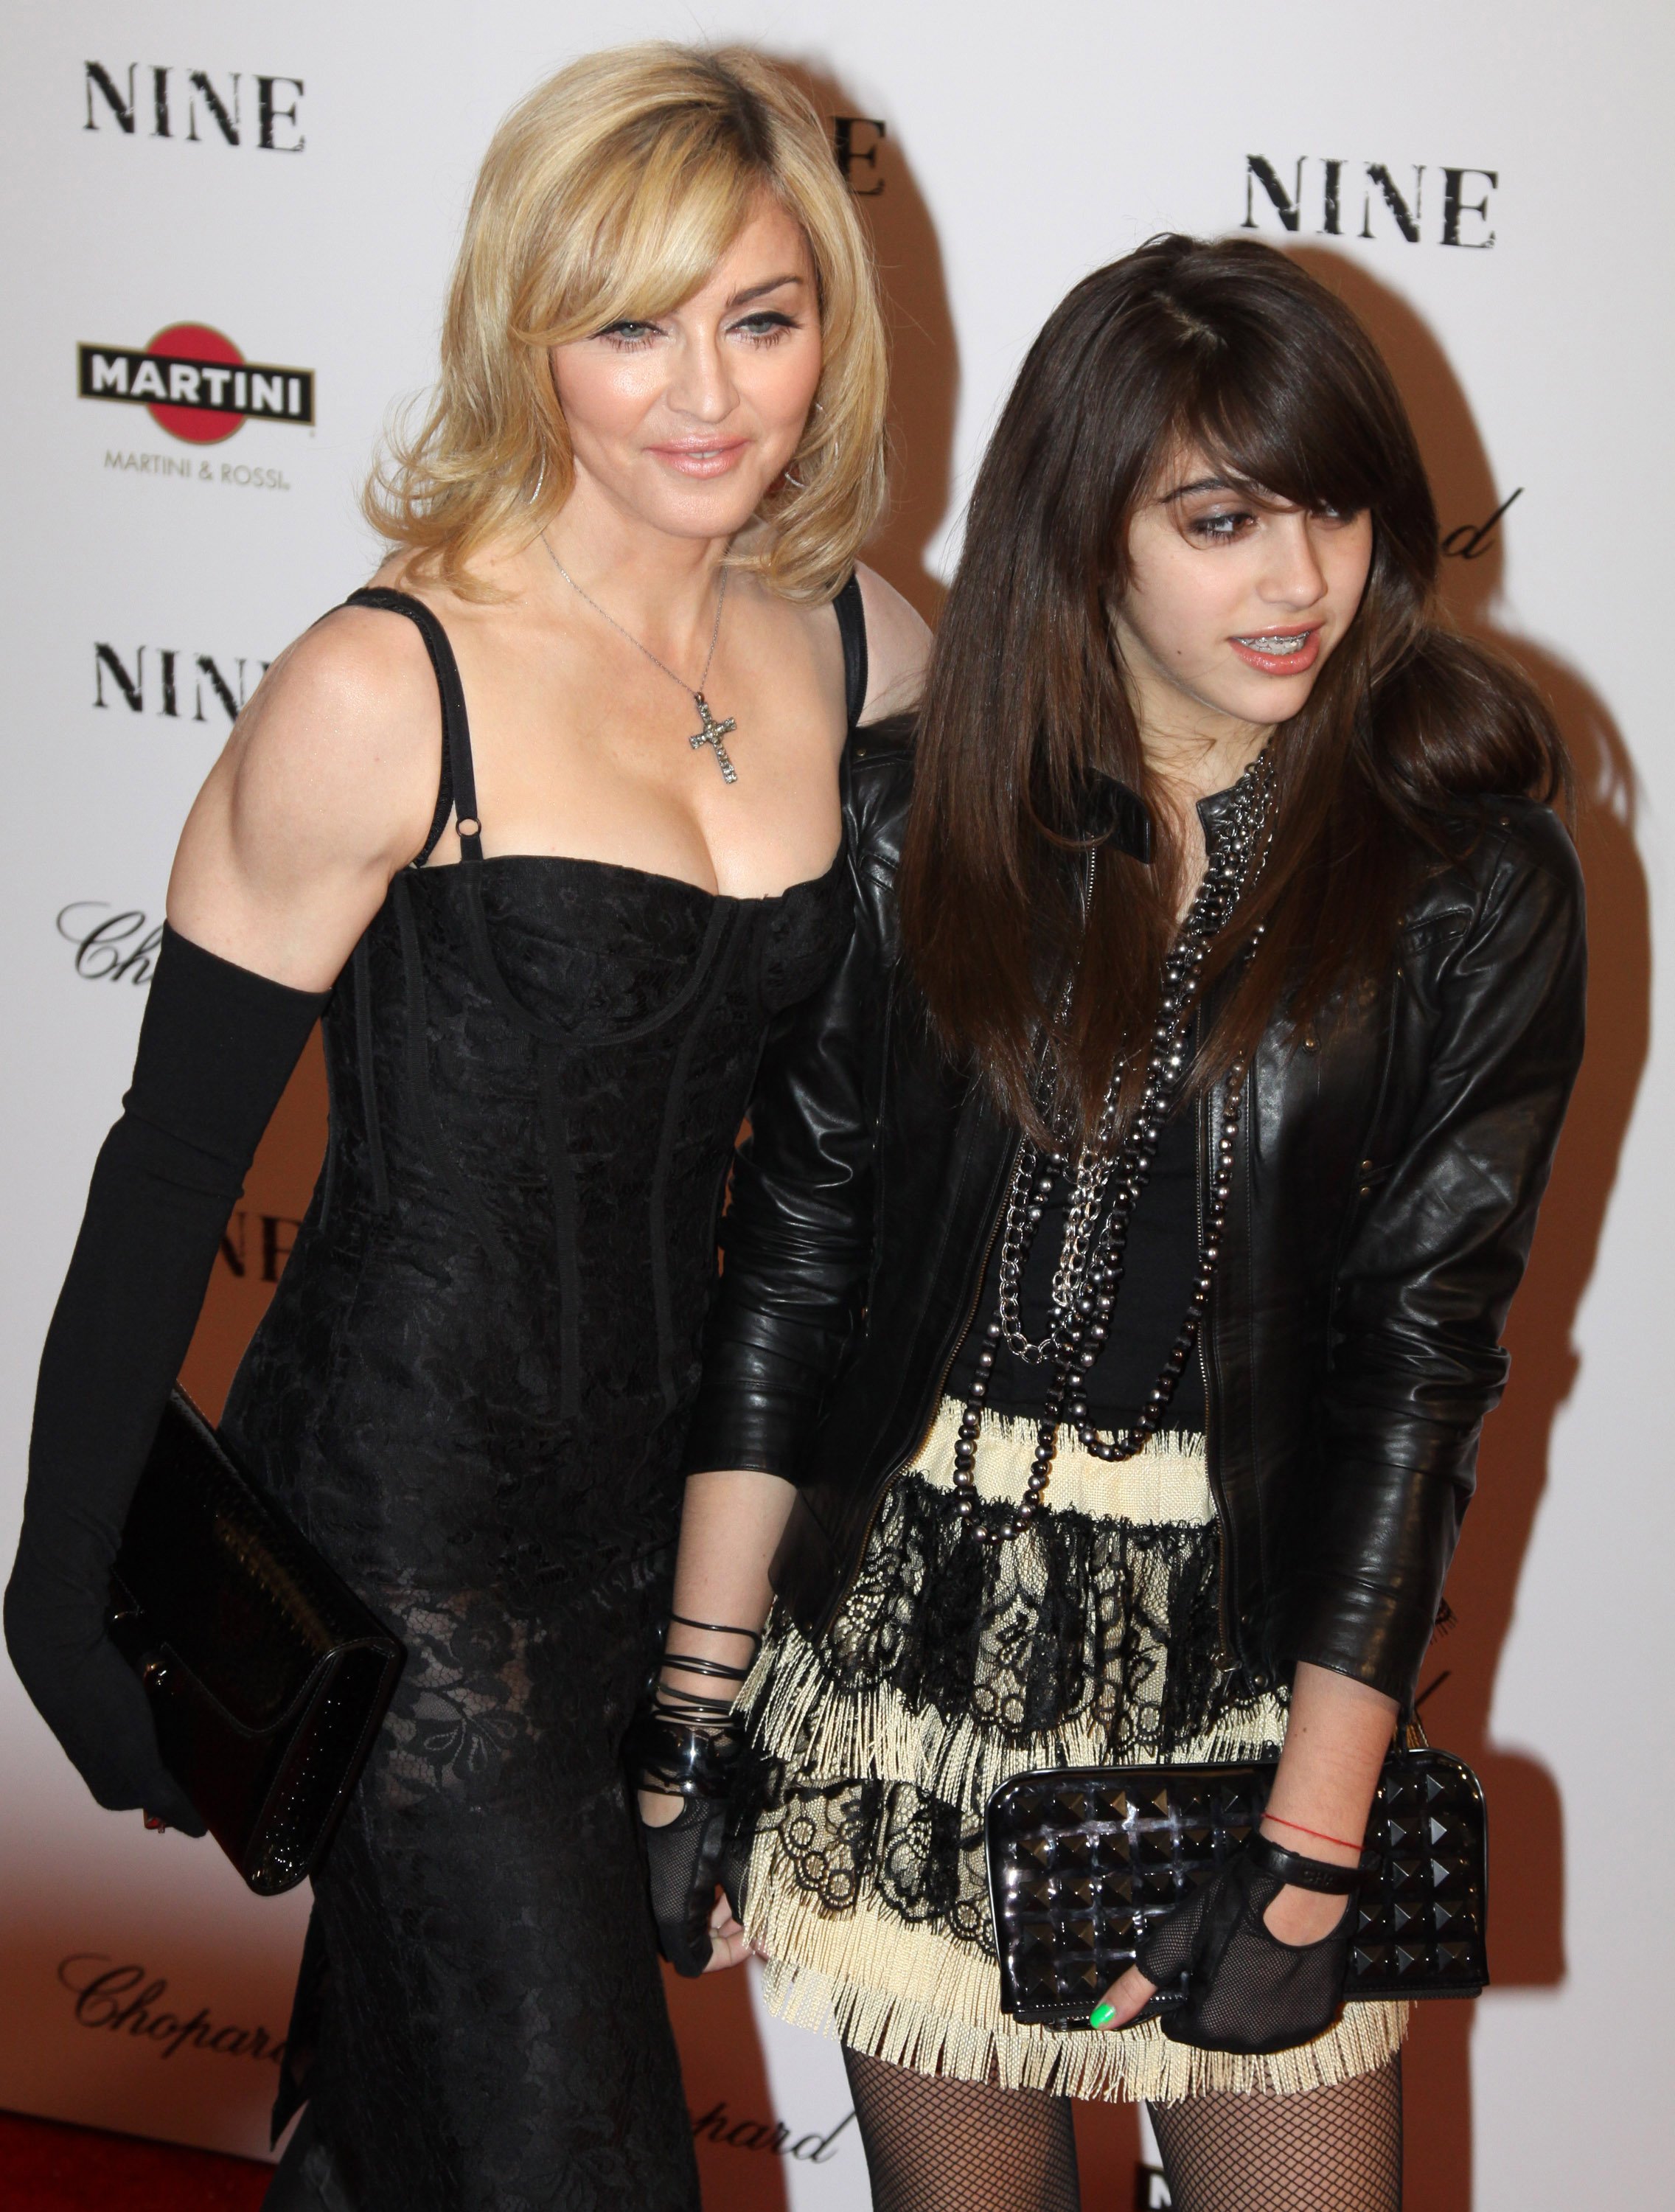 Madonna and Lourdes Leon pose at the premiere of "Nine" at the Ziegfeld Theatre on December 15, 2009, in New York City | Source: Getty Images